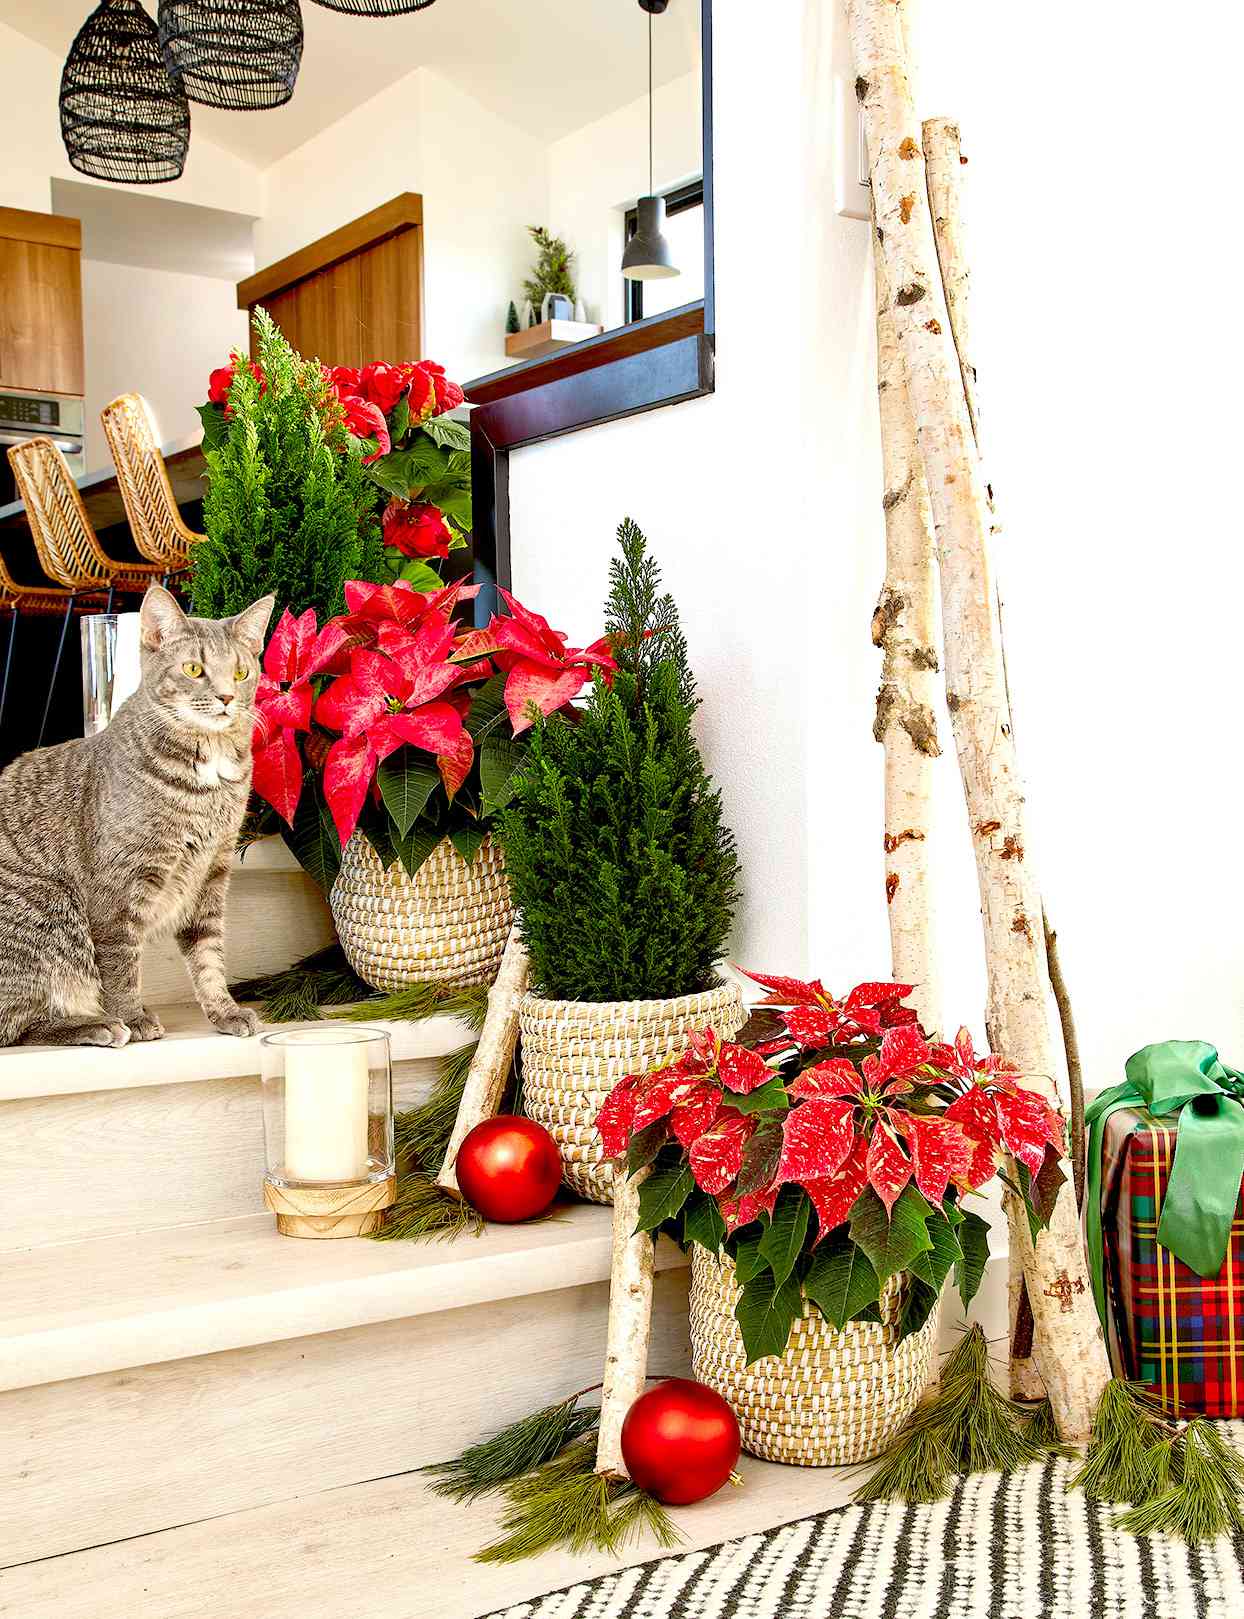 Poinsettias and Christmas décor with cat